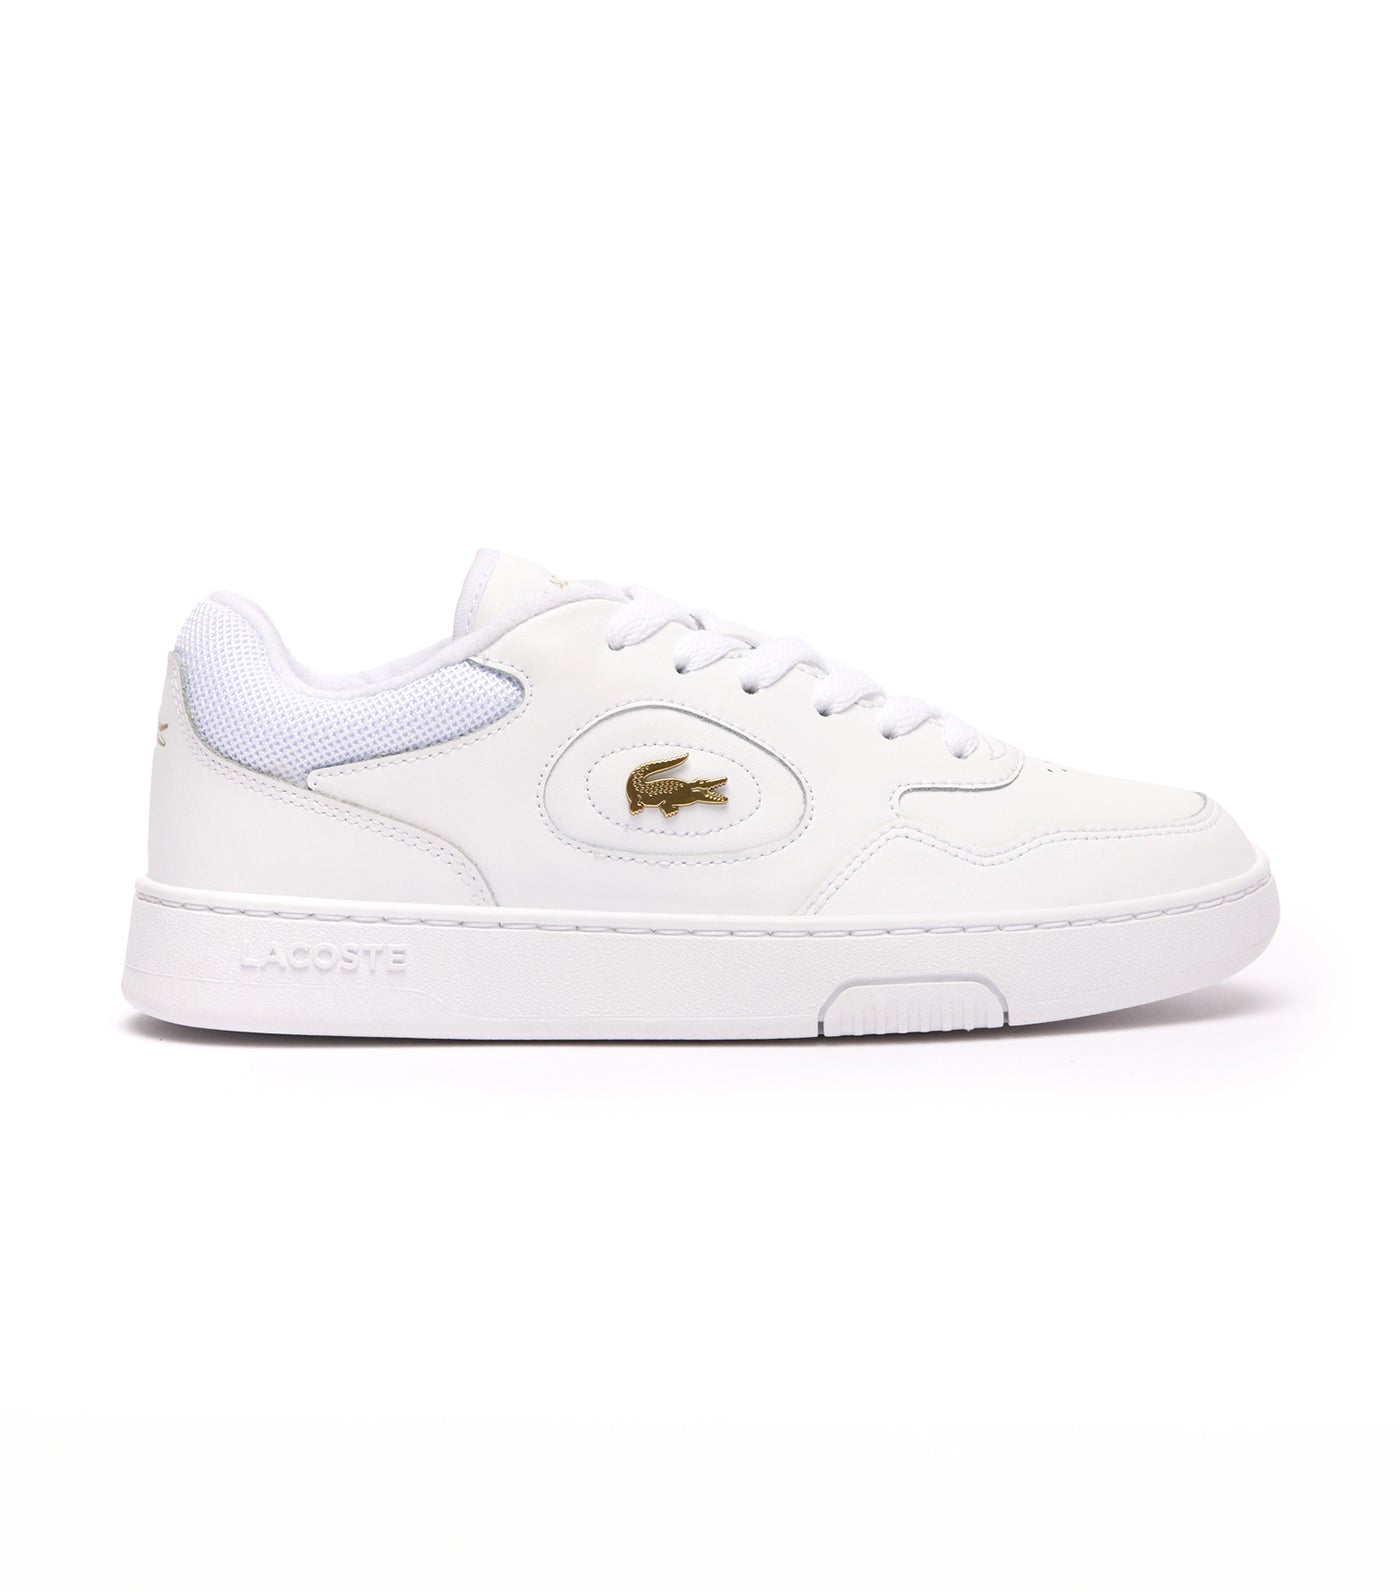 Women's Lineset Leather Trainers  White/Gold